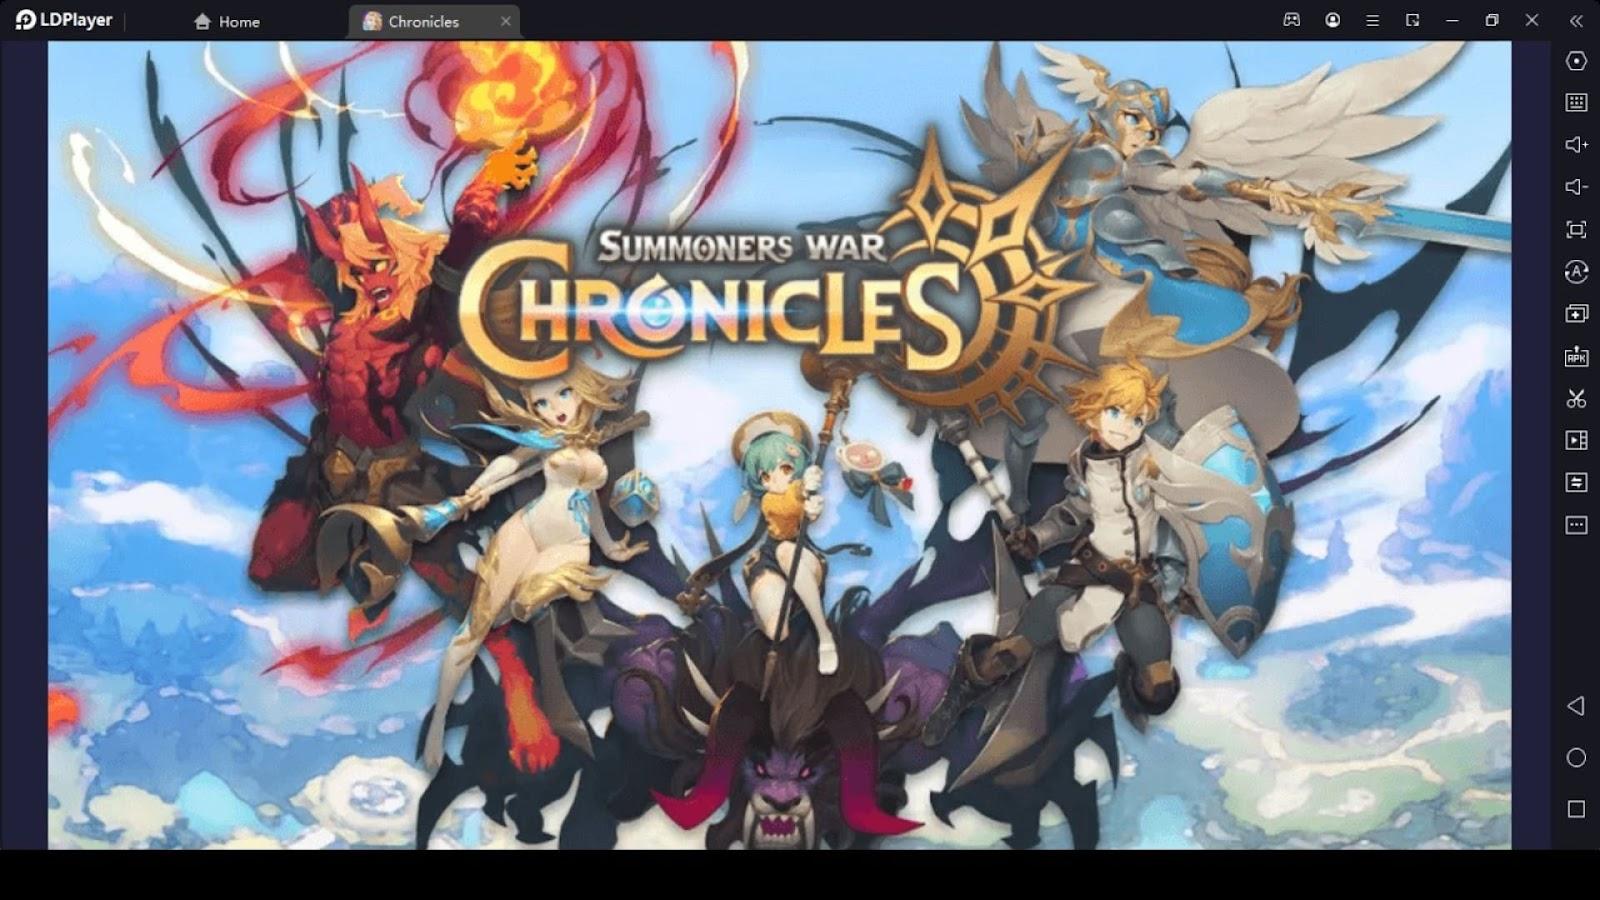 How Can I Play Summoners War: Chronicles with an Emulator